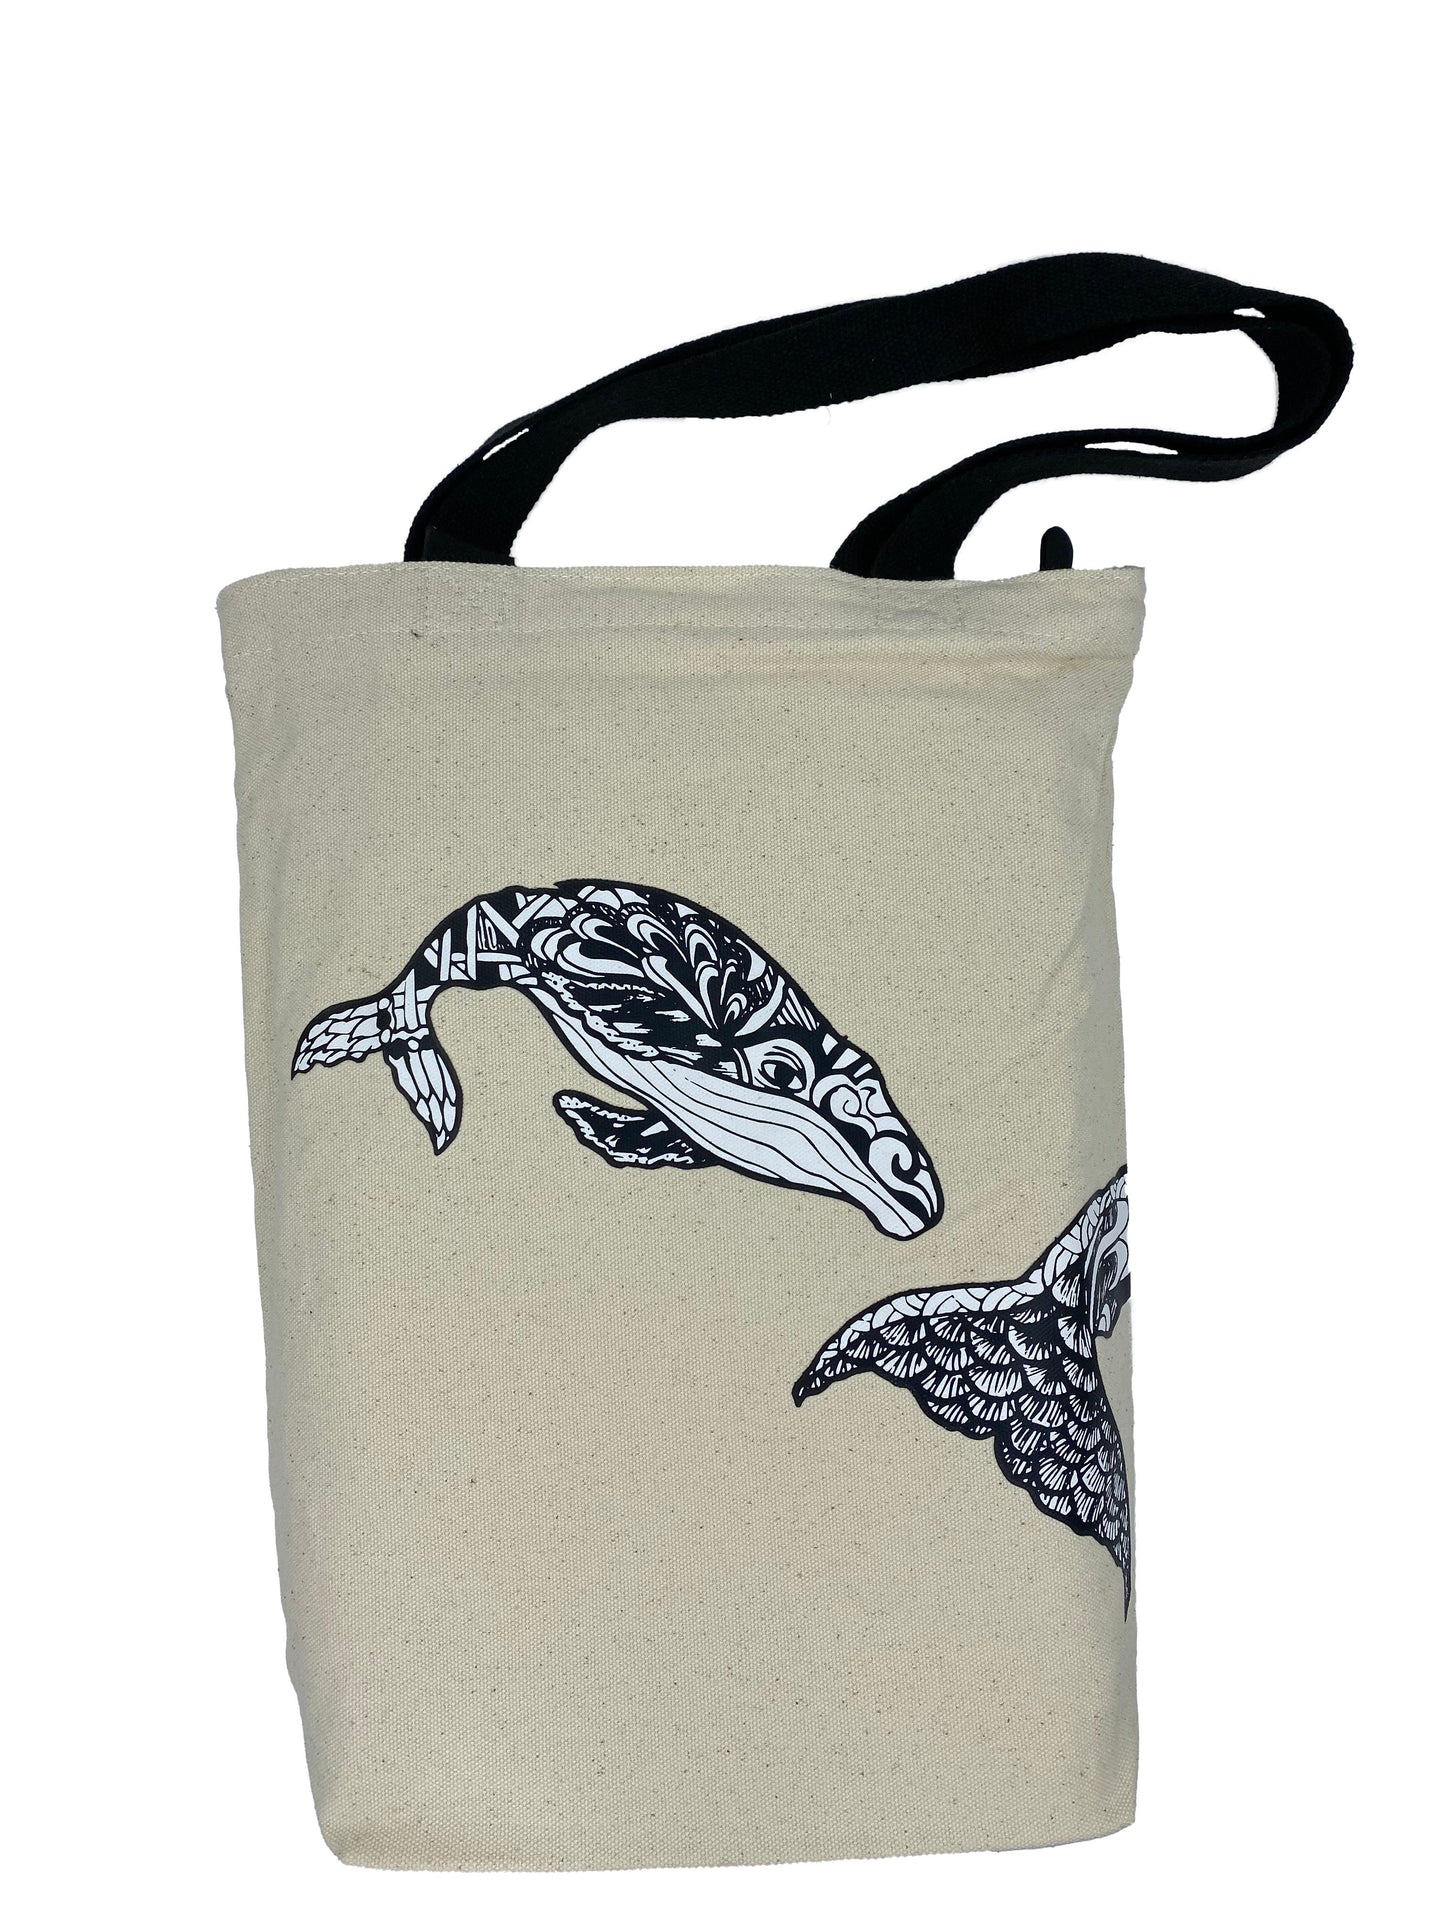 Tote Bag - Whale by Jolie